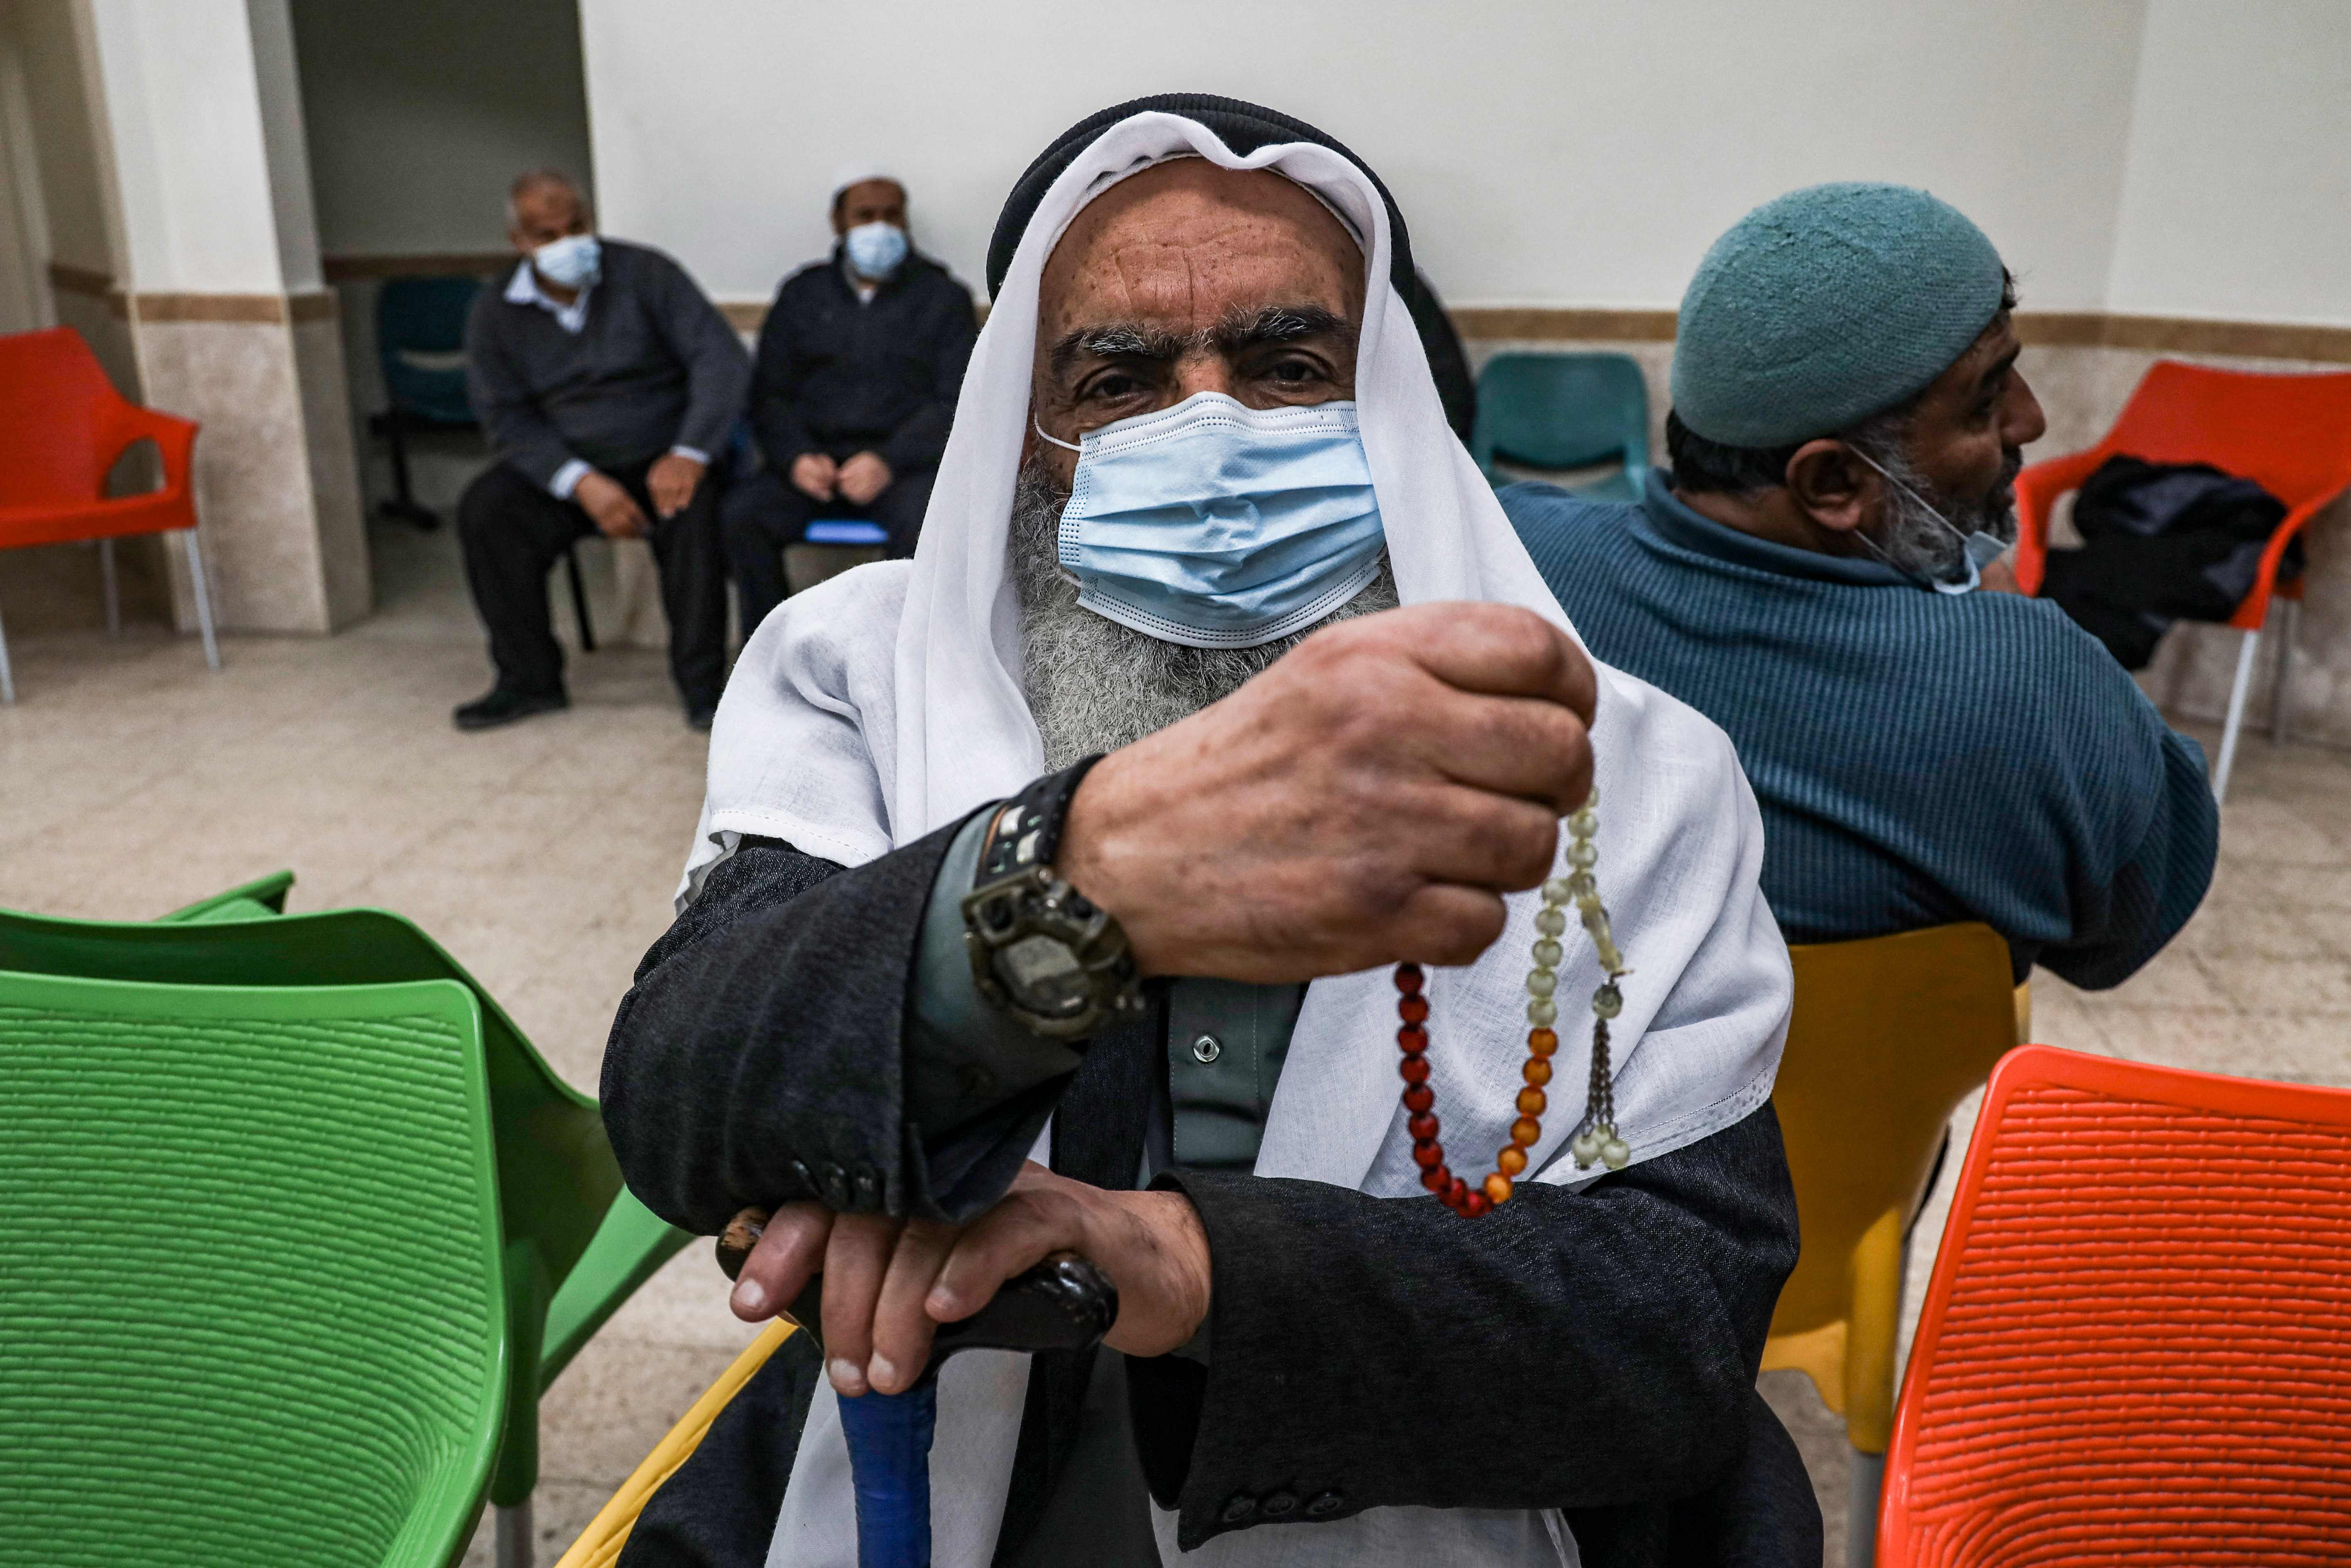 An elderly Palestinian waits to receive a dose of COVID-19 coronavirus vaccine at a clinic in Gaza City